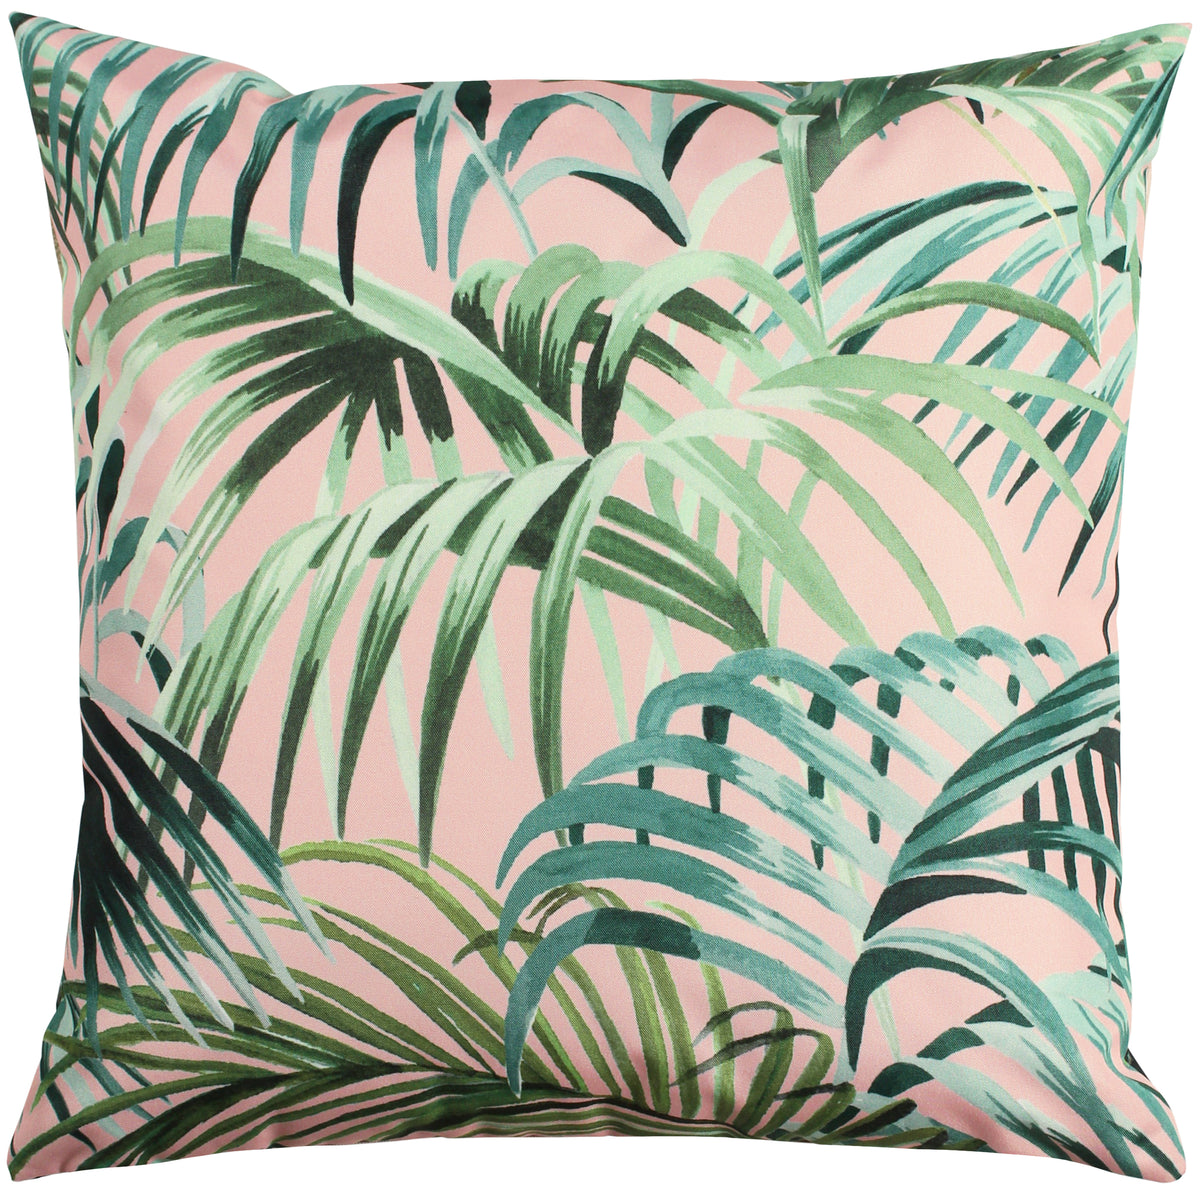 Jungle 43cm Reversible Outdoor Polyester Cushion